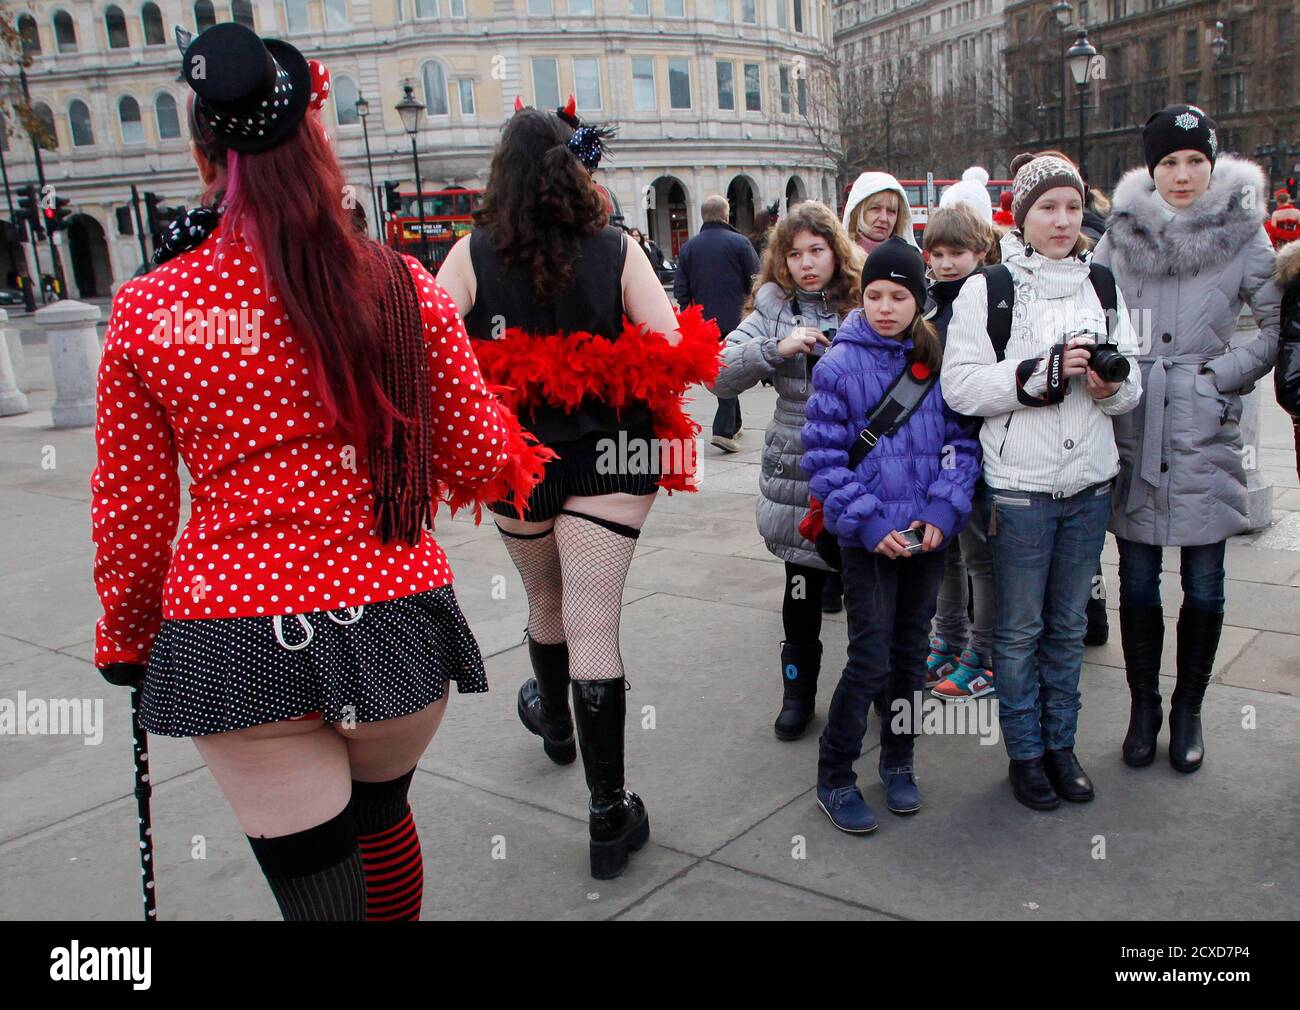 Tourists watch as burlesque enthusiasts and staff of a holiday travel firm walk through Trafalgar Square after a media stunt outside the National Gallery in London January 3, 2011. The stunt was organised by Virgin Holidays in an attempt to break the world record for the world's largest burlesque dance.  REUTERS/Suzanne Plunkett (BRITAIN - Tags: SOCIETY TRAVEL) Stock Photo